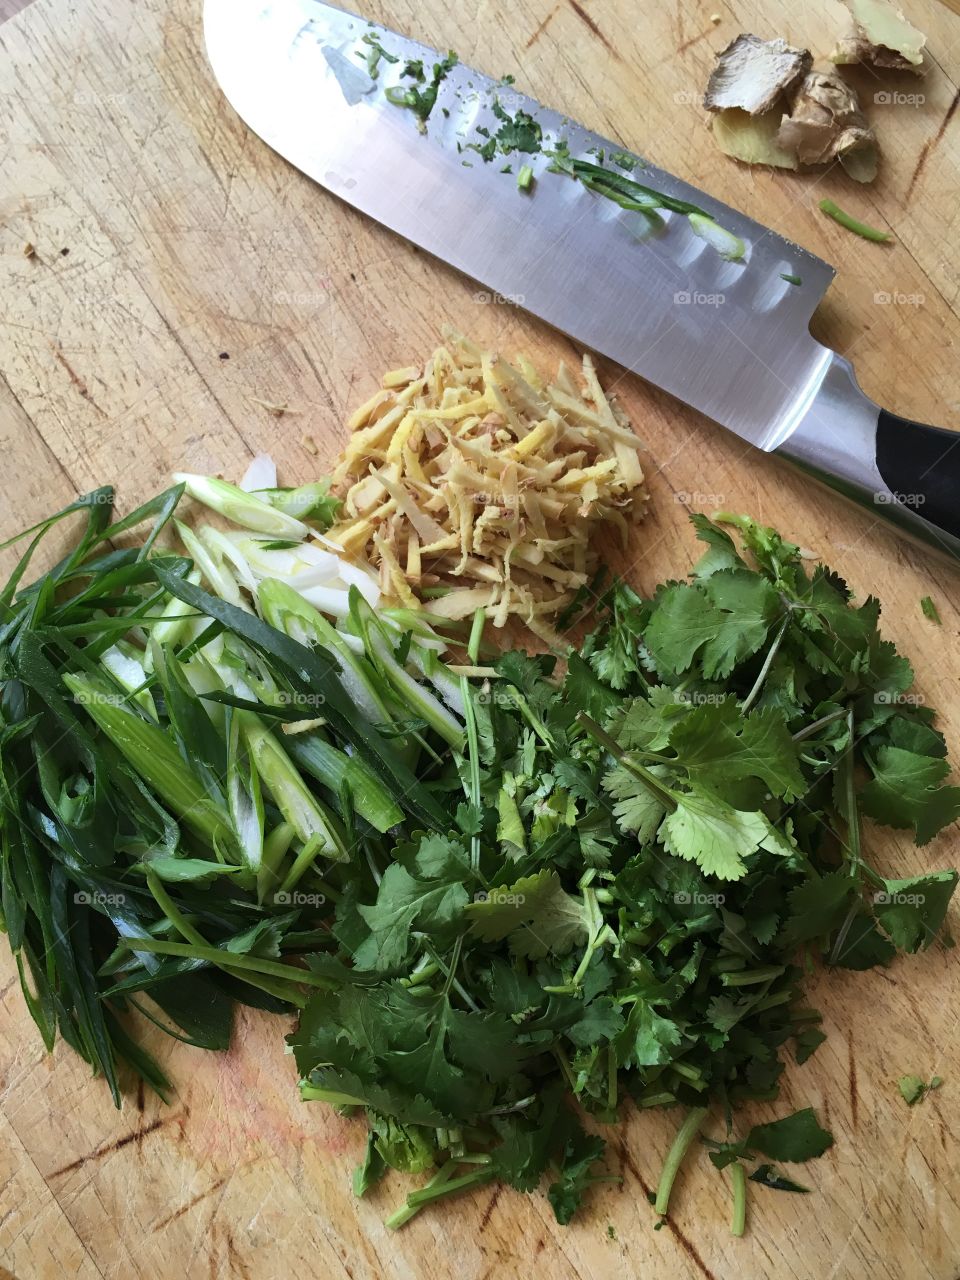 This is a photo of chopped ginger green onions and cilantro on a wooden board